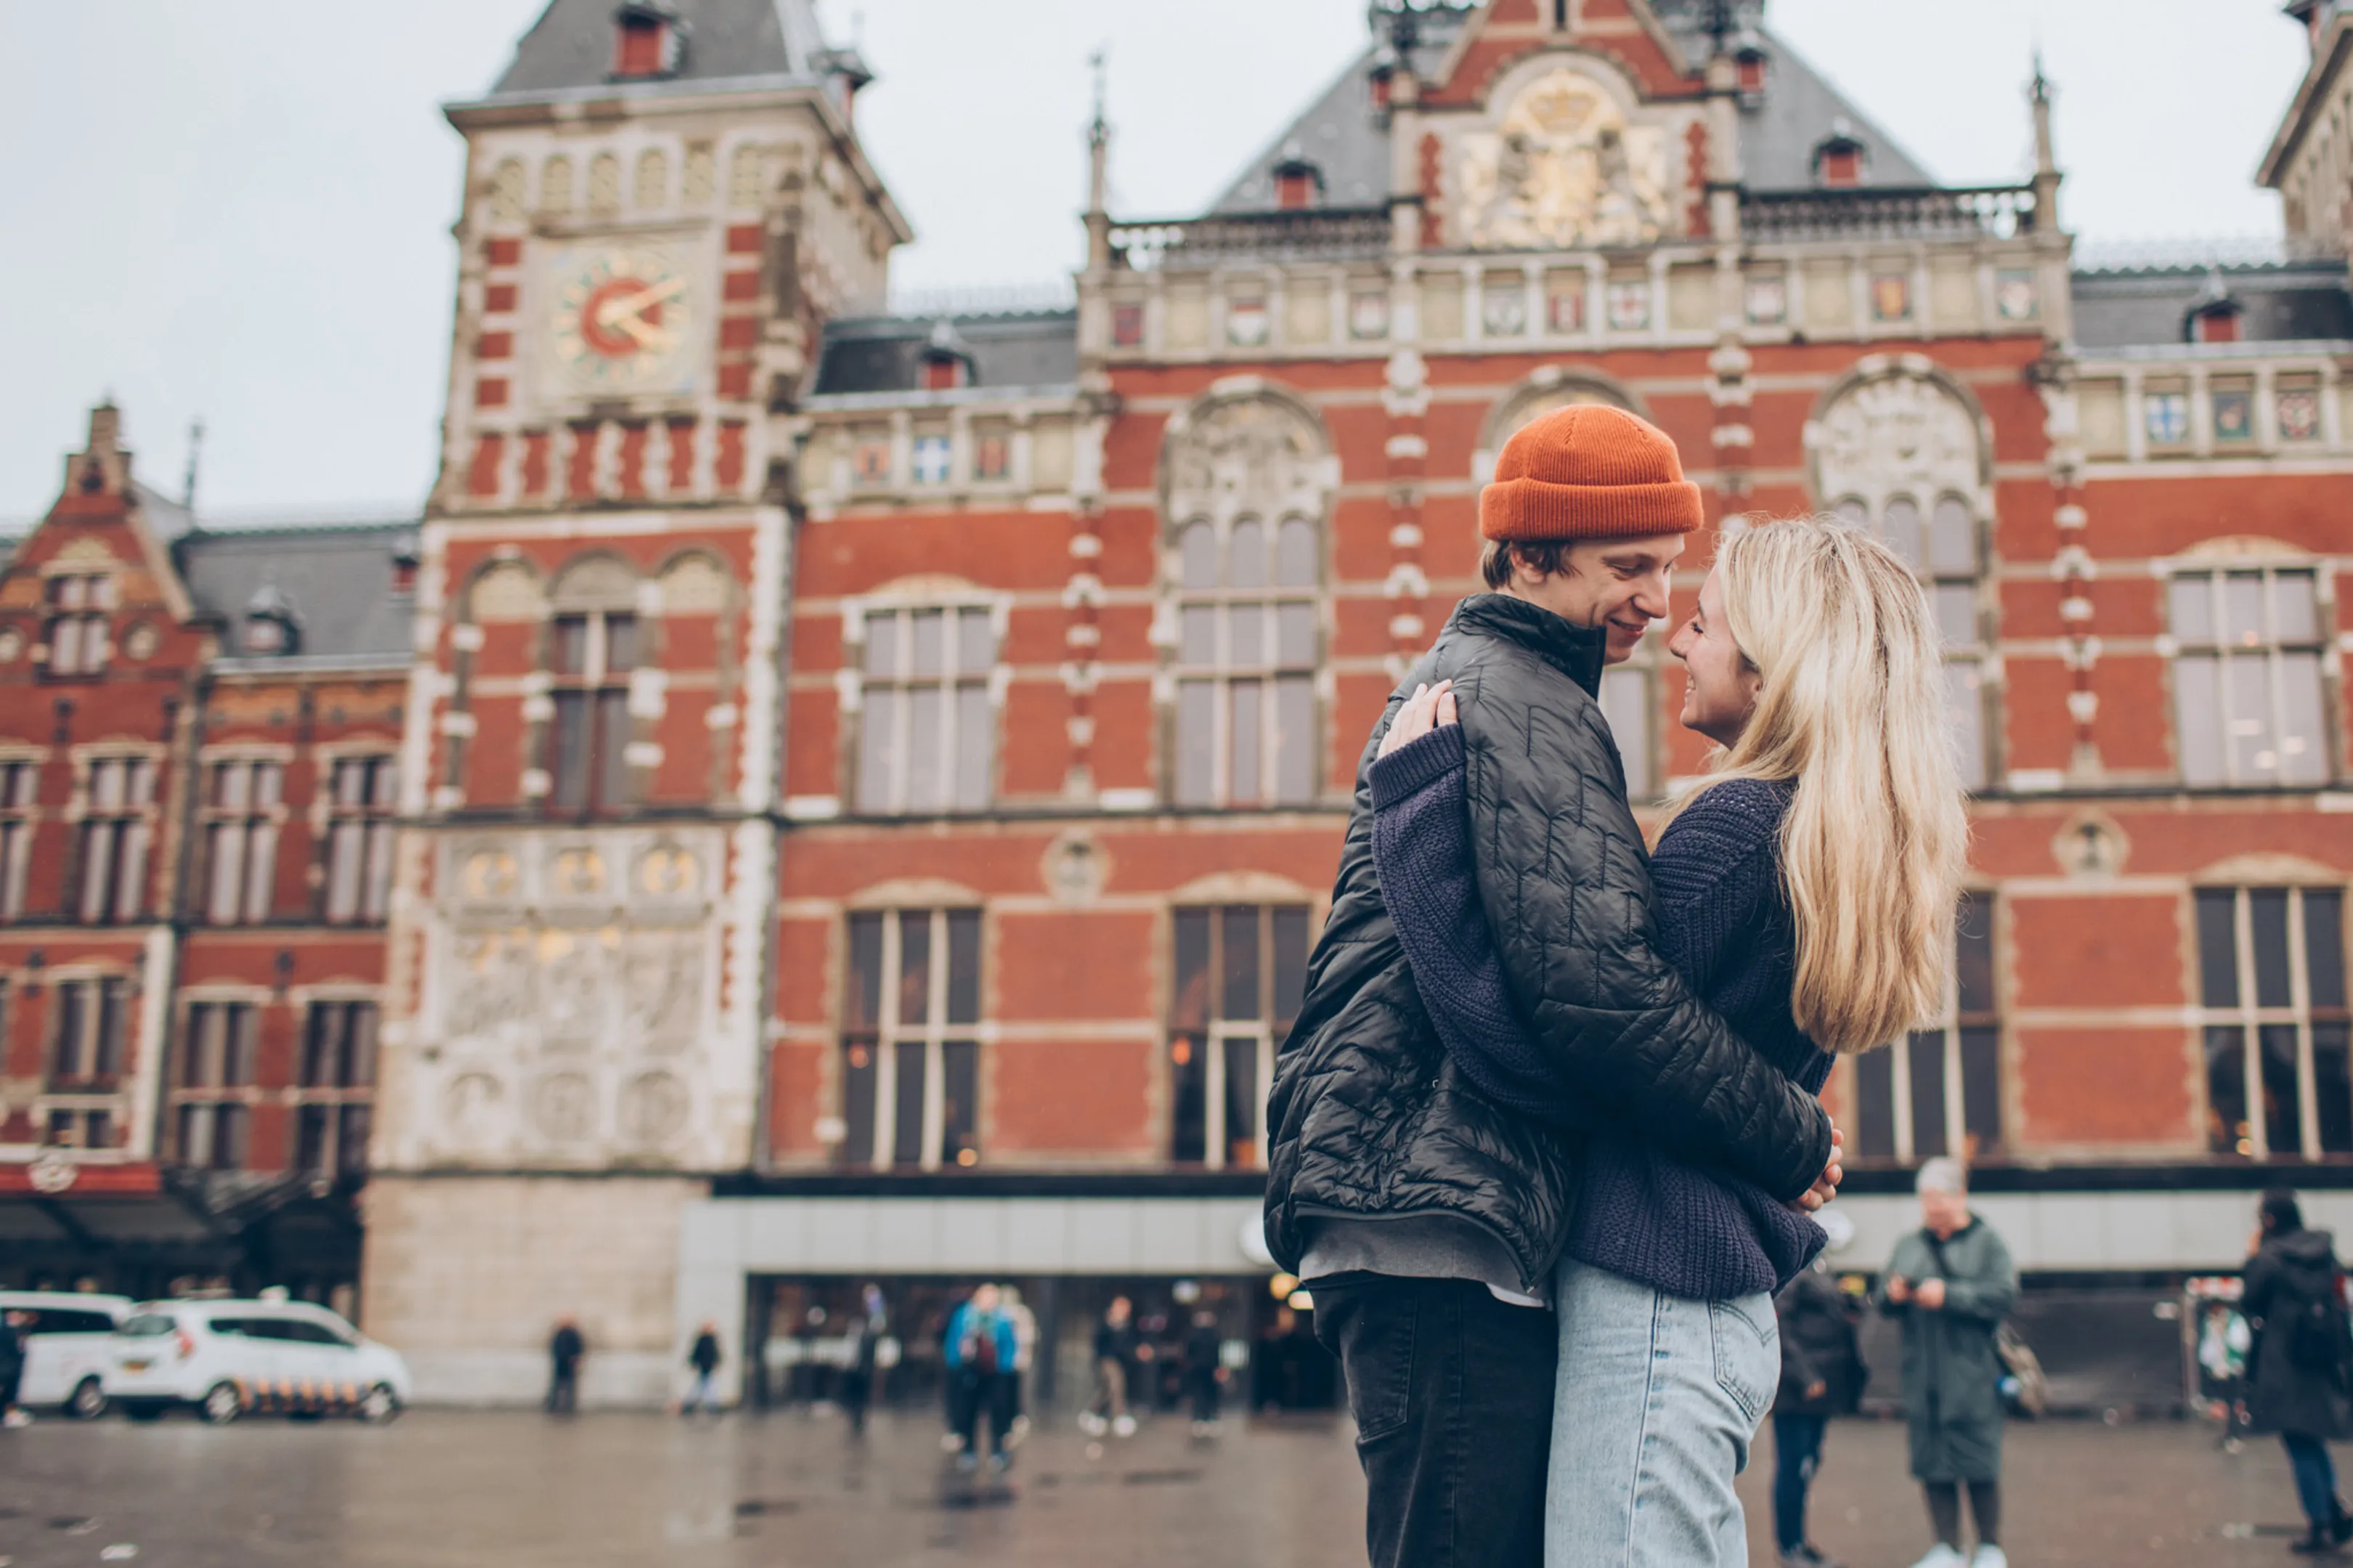 Capture your memories with a photoshoot in Amsterdam